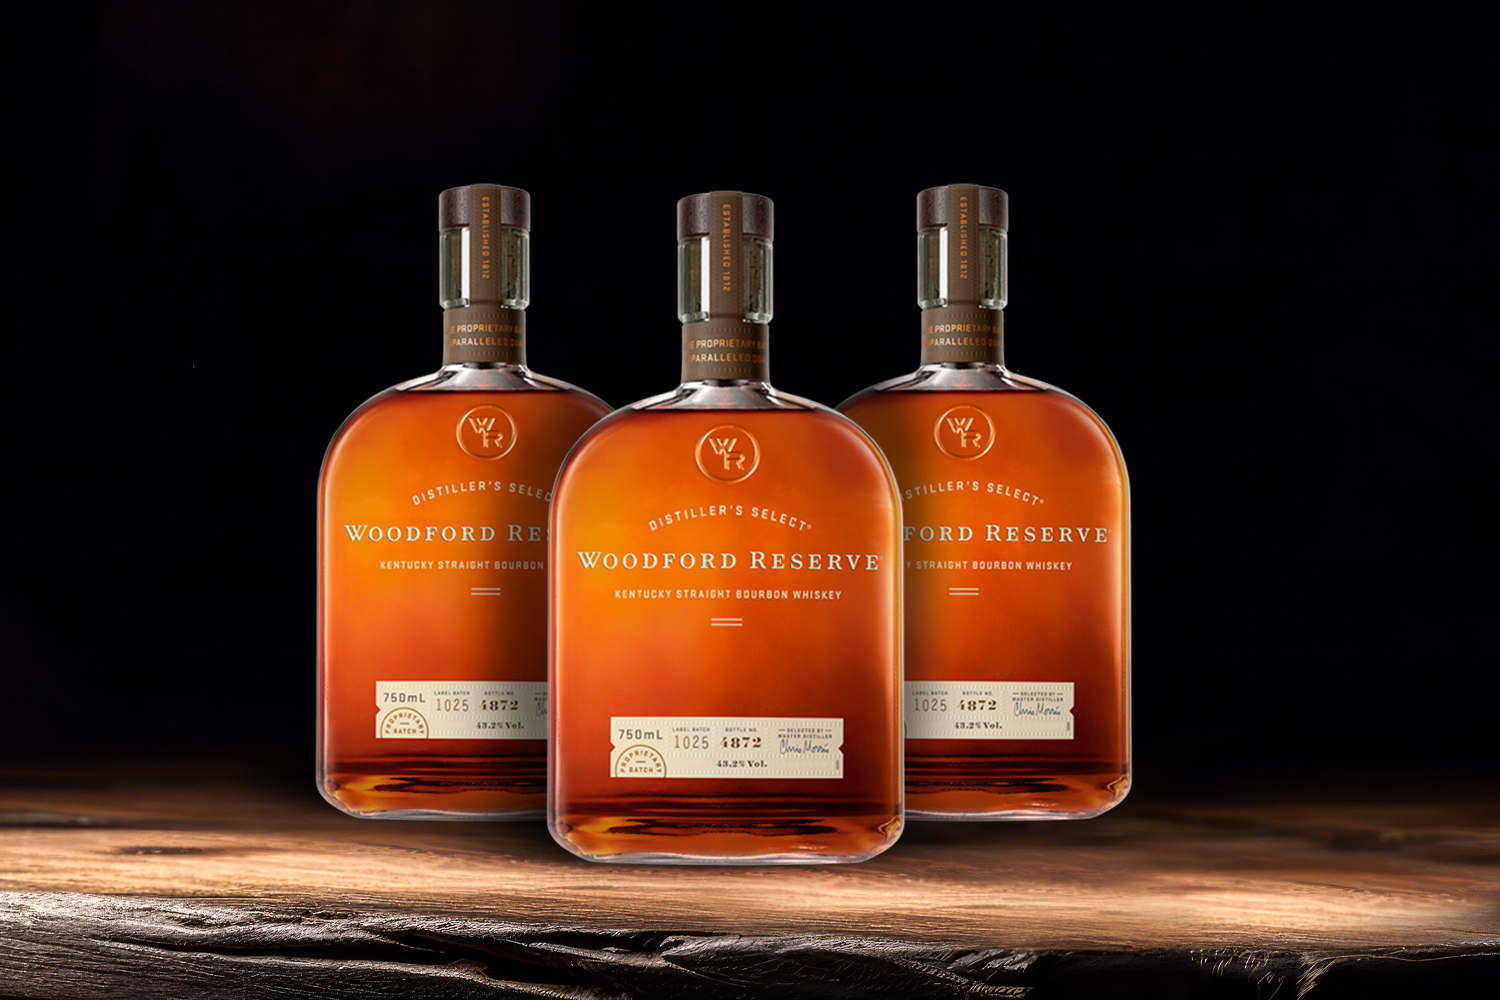 3 bottles of woodford reserve on a wooden table